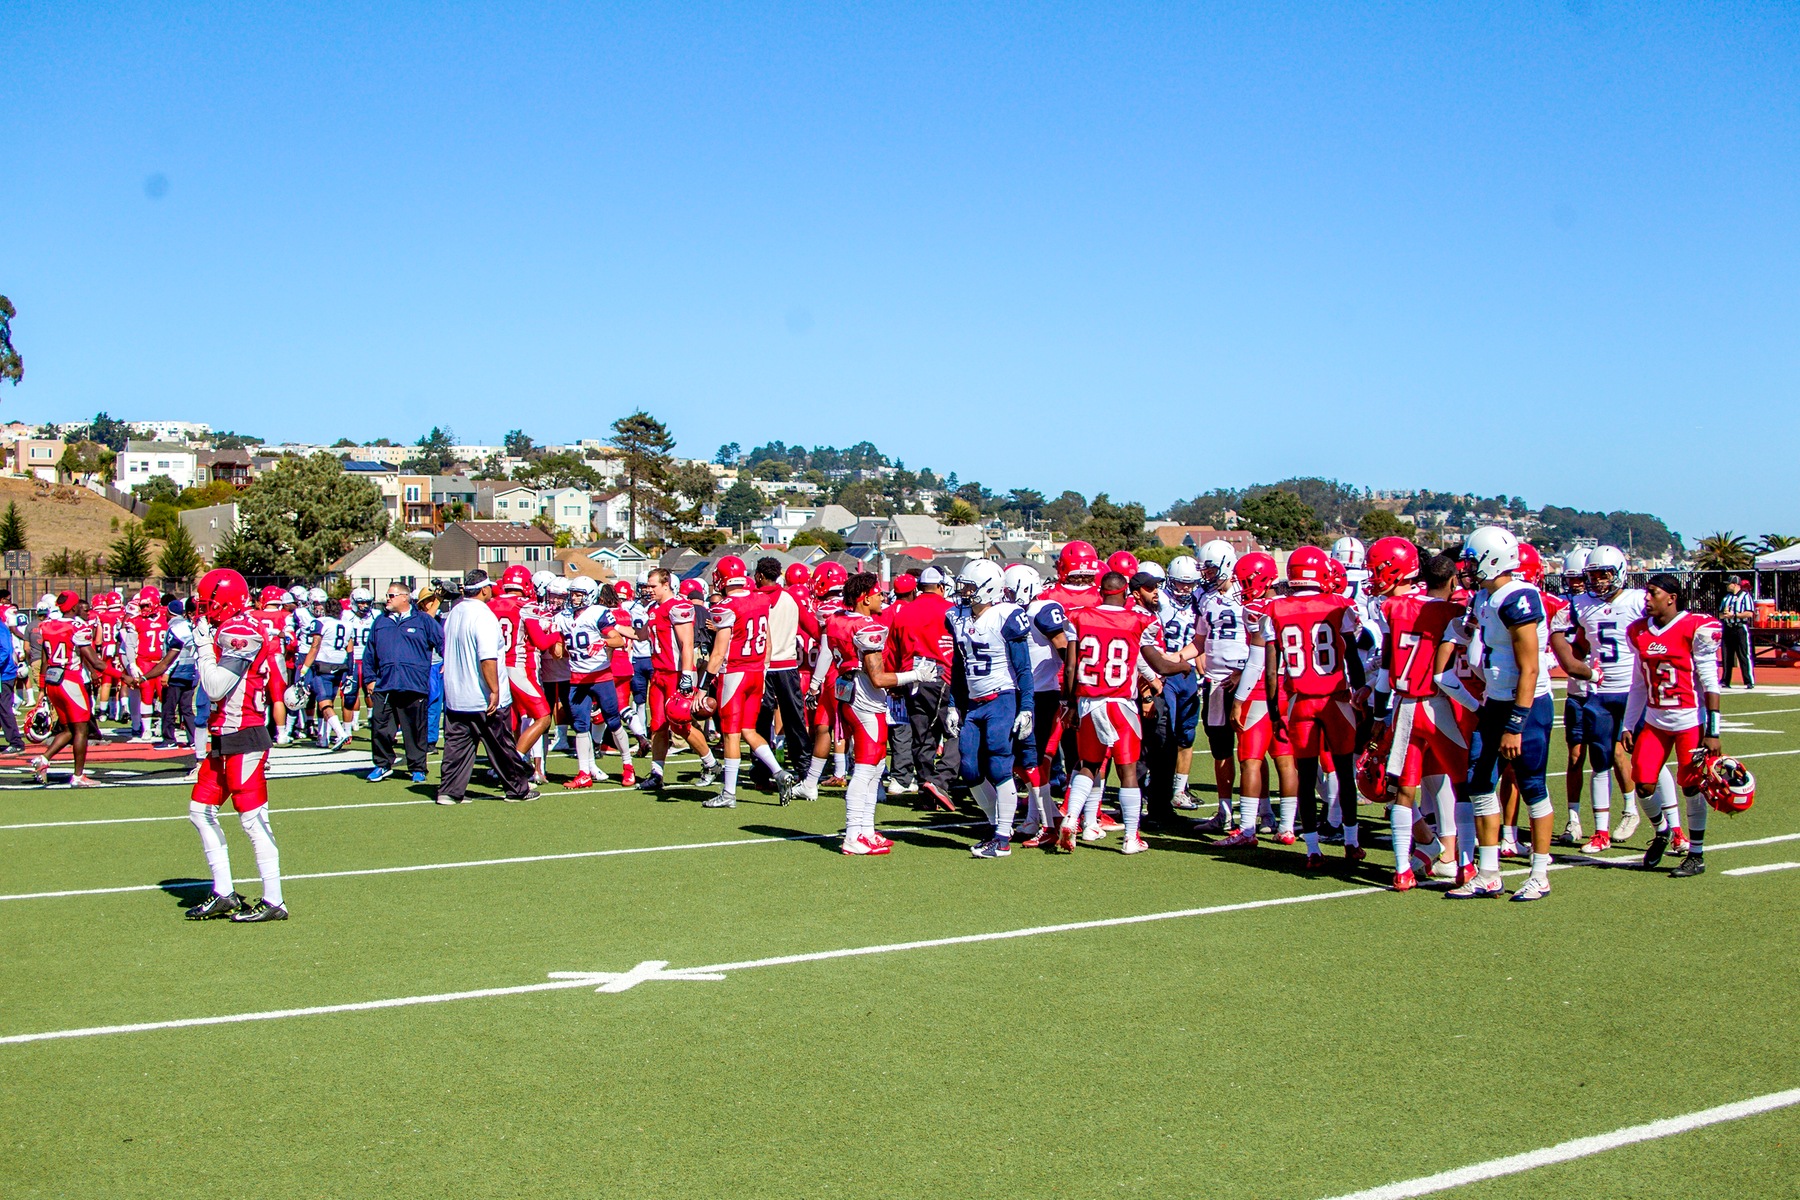 CCSF meet the SRJC players to exchange handshakes before the game. 